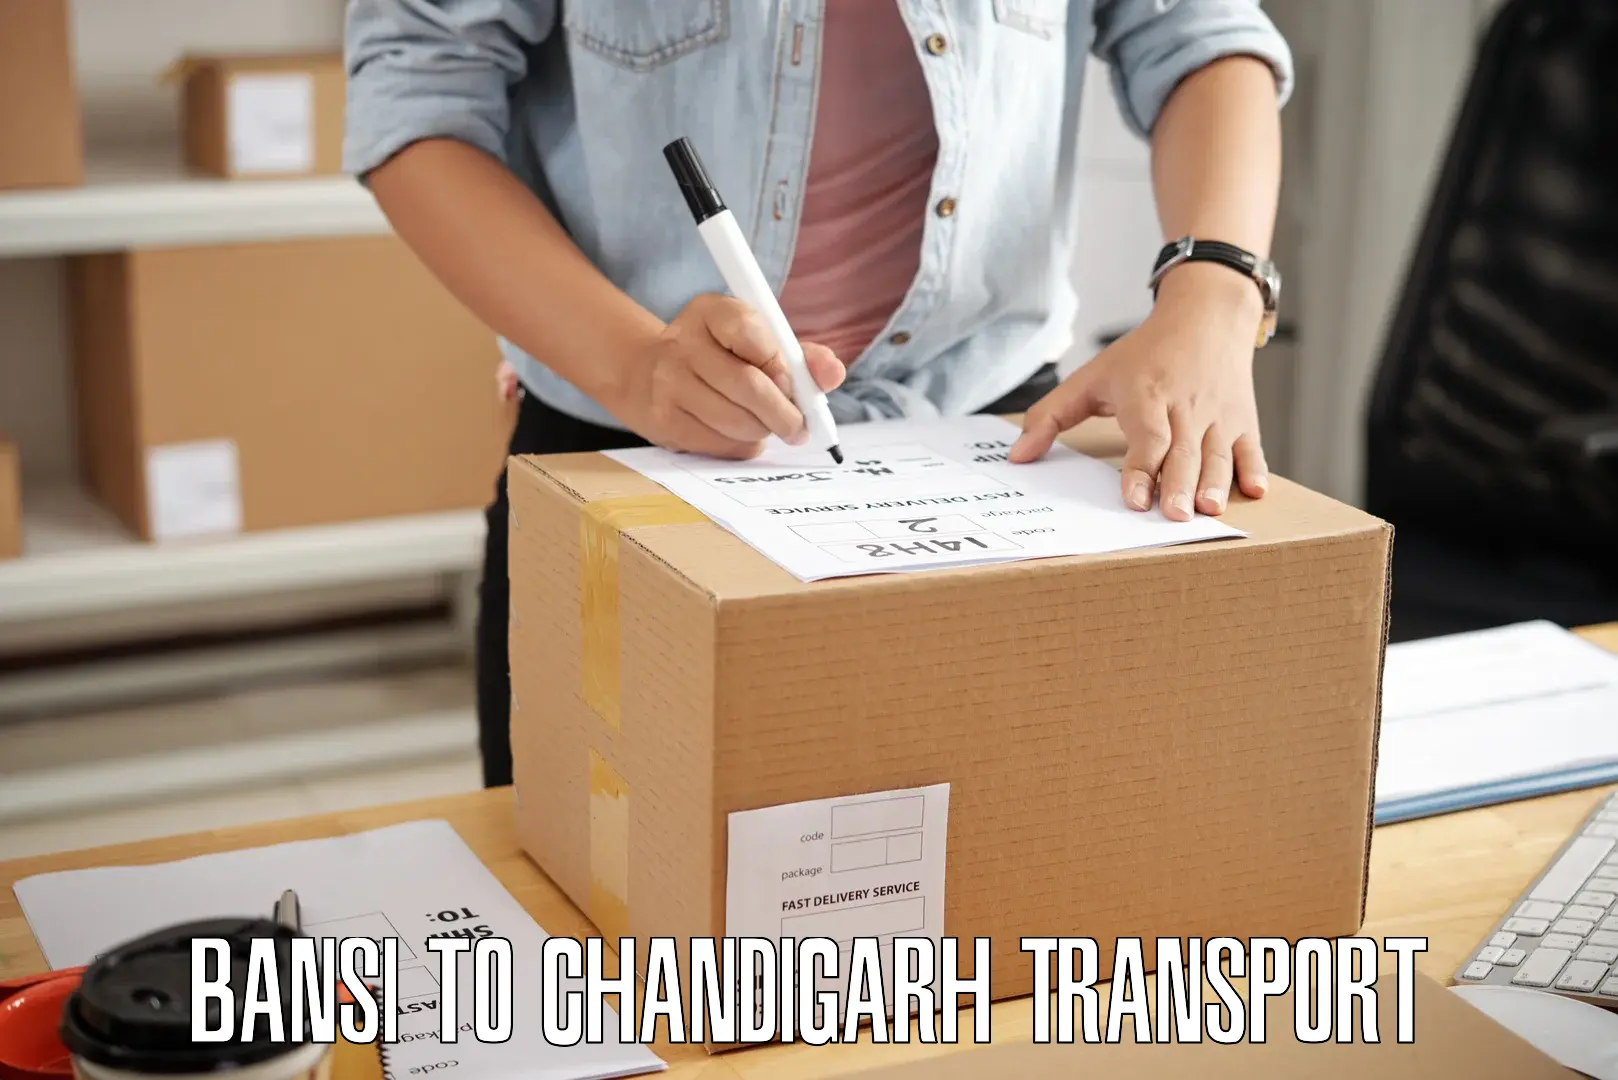 Daily parcel service transport Bansi to Chandigarh